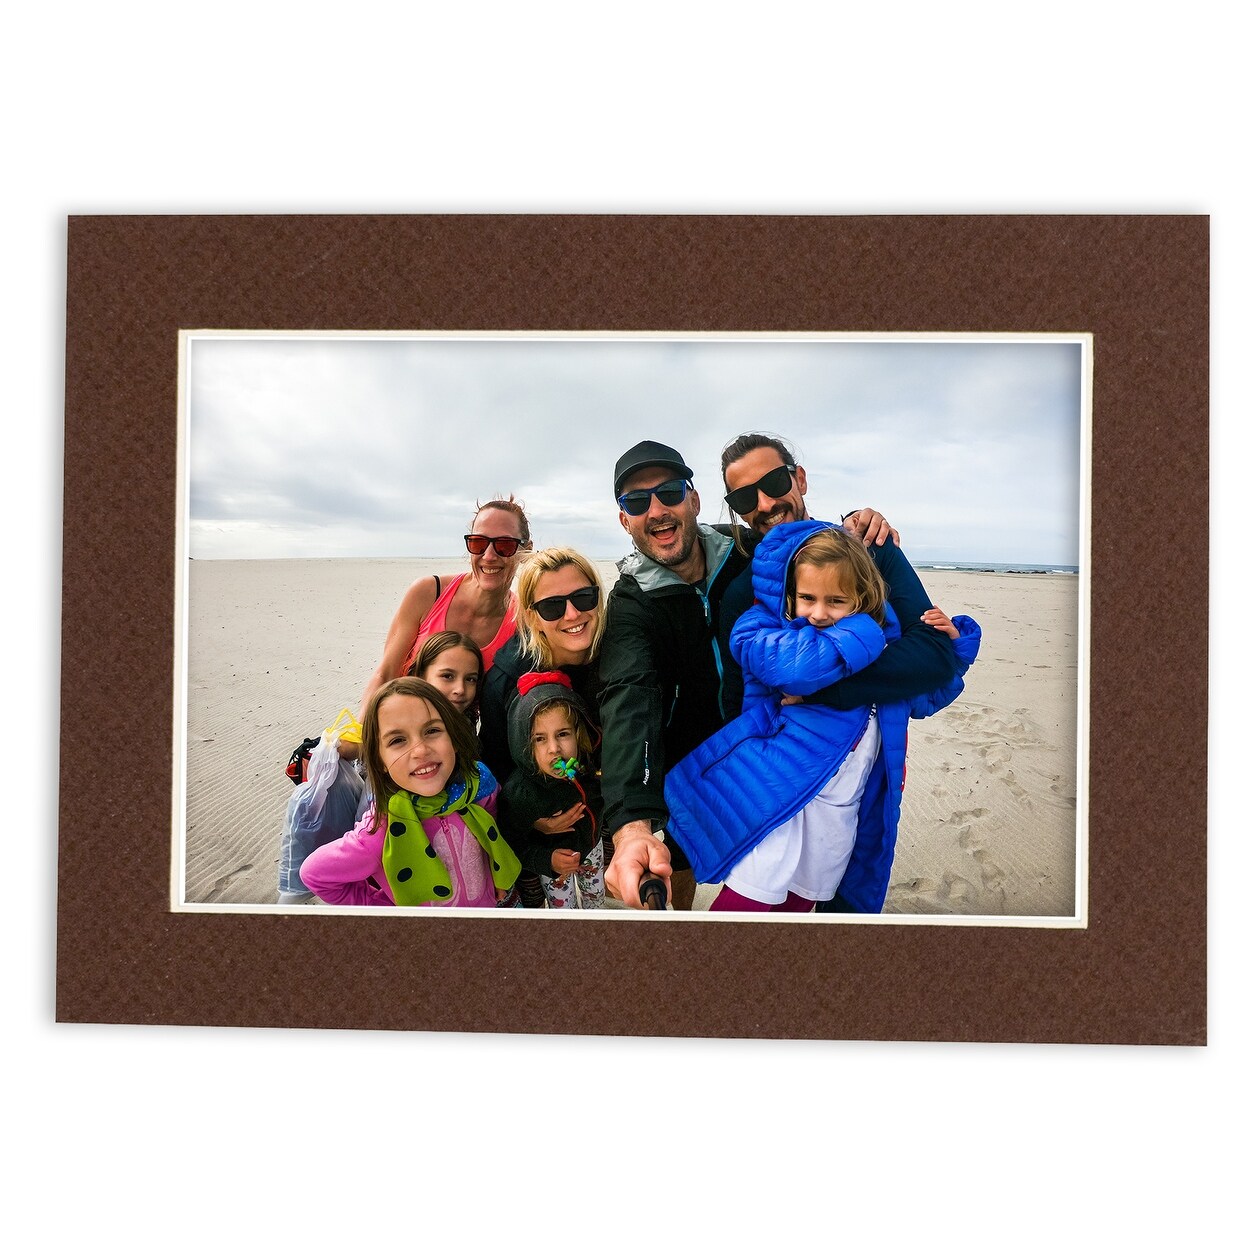  11x14 Mat for 8.5x11 Photo - Precut White on Black Double Mat  Picture Matboard for Frames Measuring 11 x 14 Inches - Bevel Cut Matte to  Display Art Measuring 8.5 x